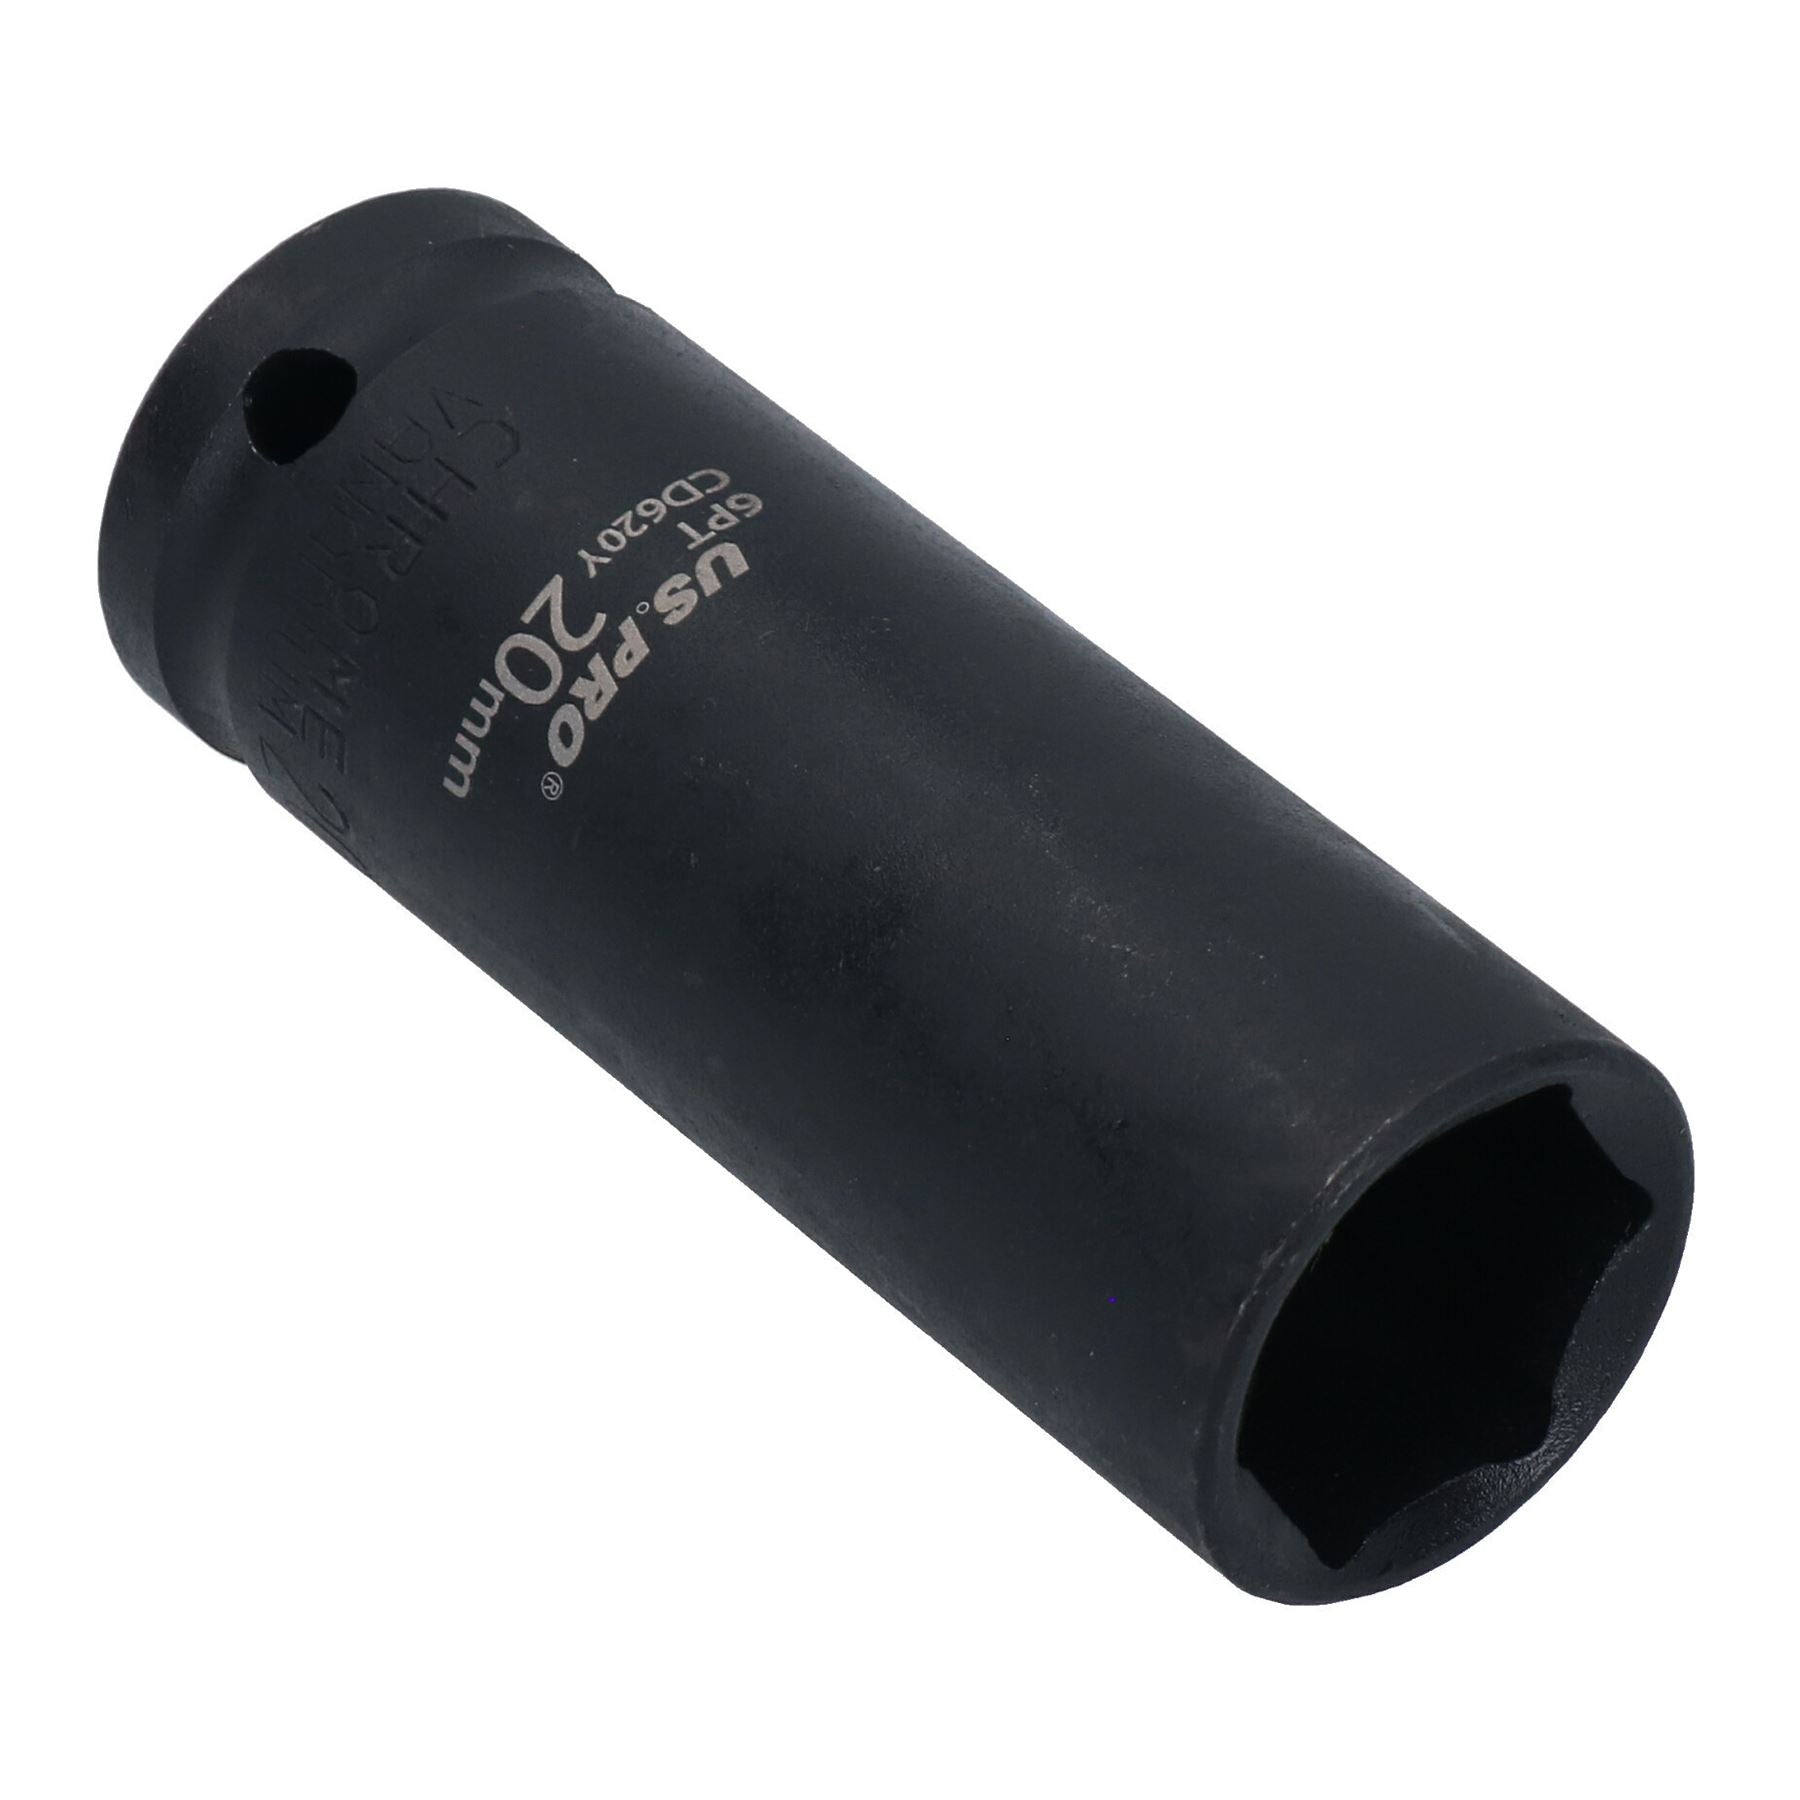 20mm 1/2" Drive Double deep Metric Impacted Impact Socket Single Hex 6 Sided